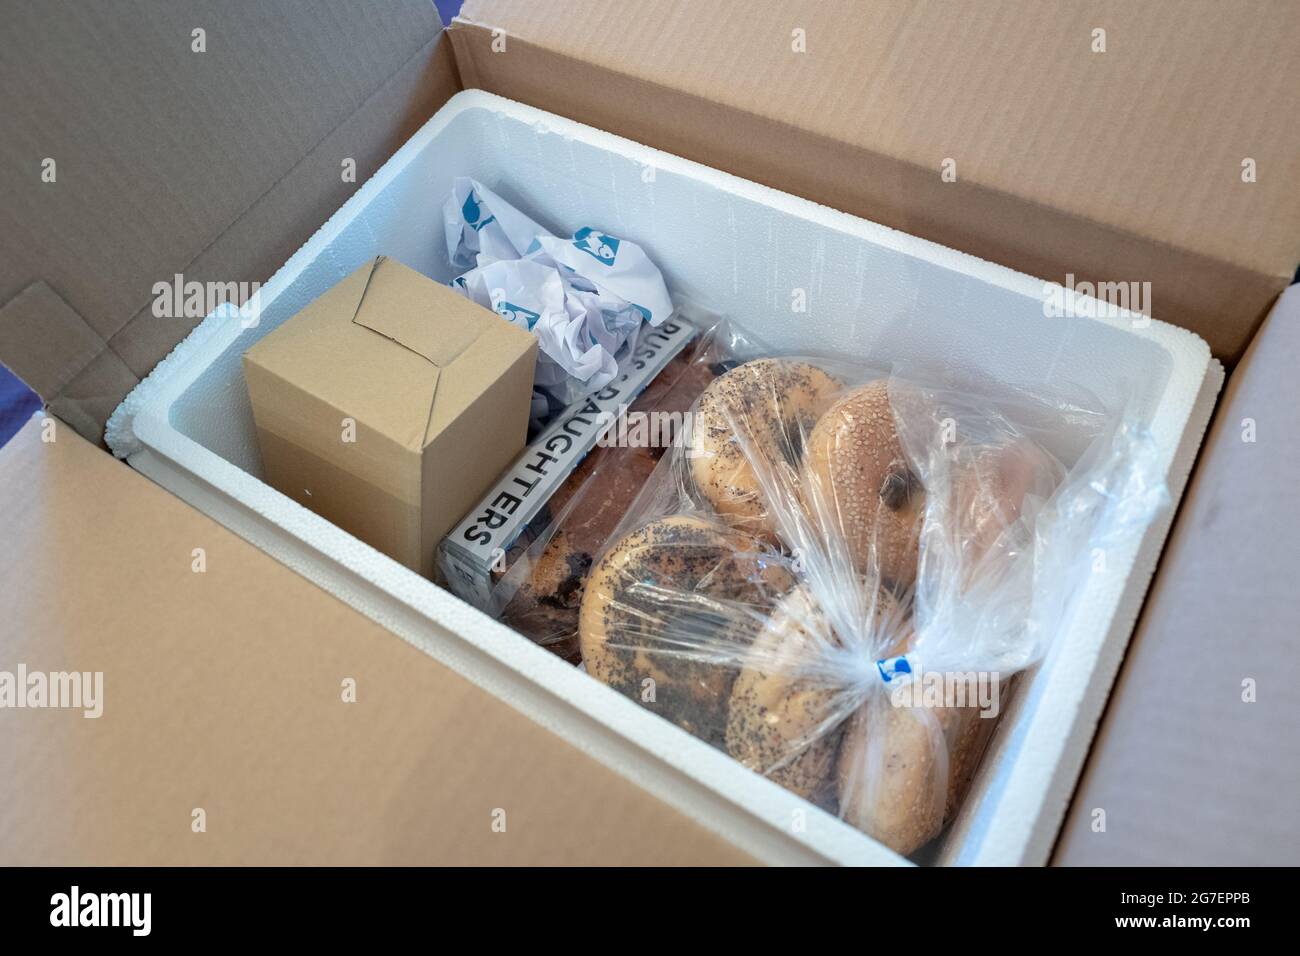 Bagels, coffee and other contents of a Russ and Daughters delivery box in Lafayette, California, part of an artisan food delivery program, June 15, 2021. () Stock Photo